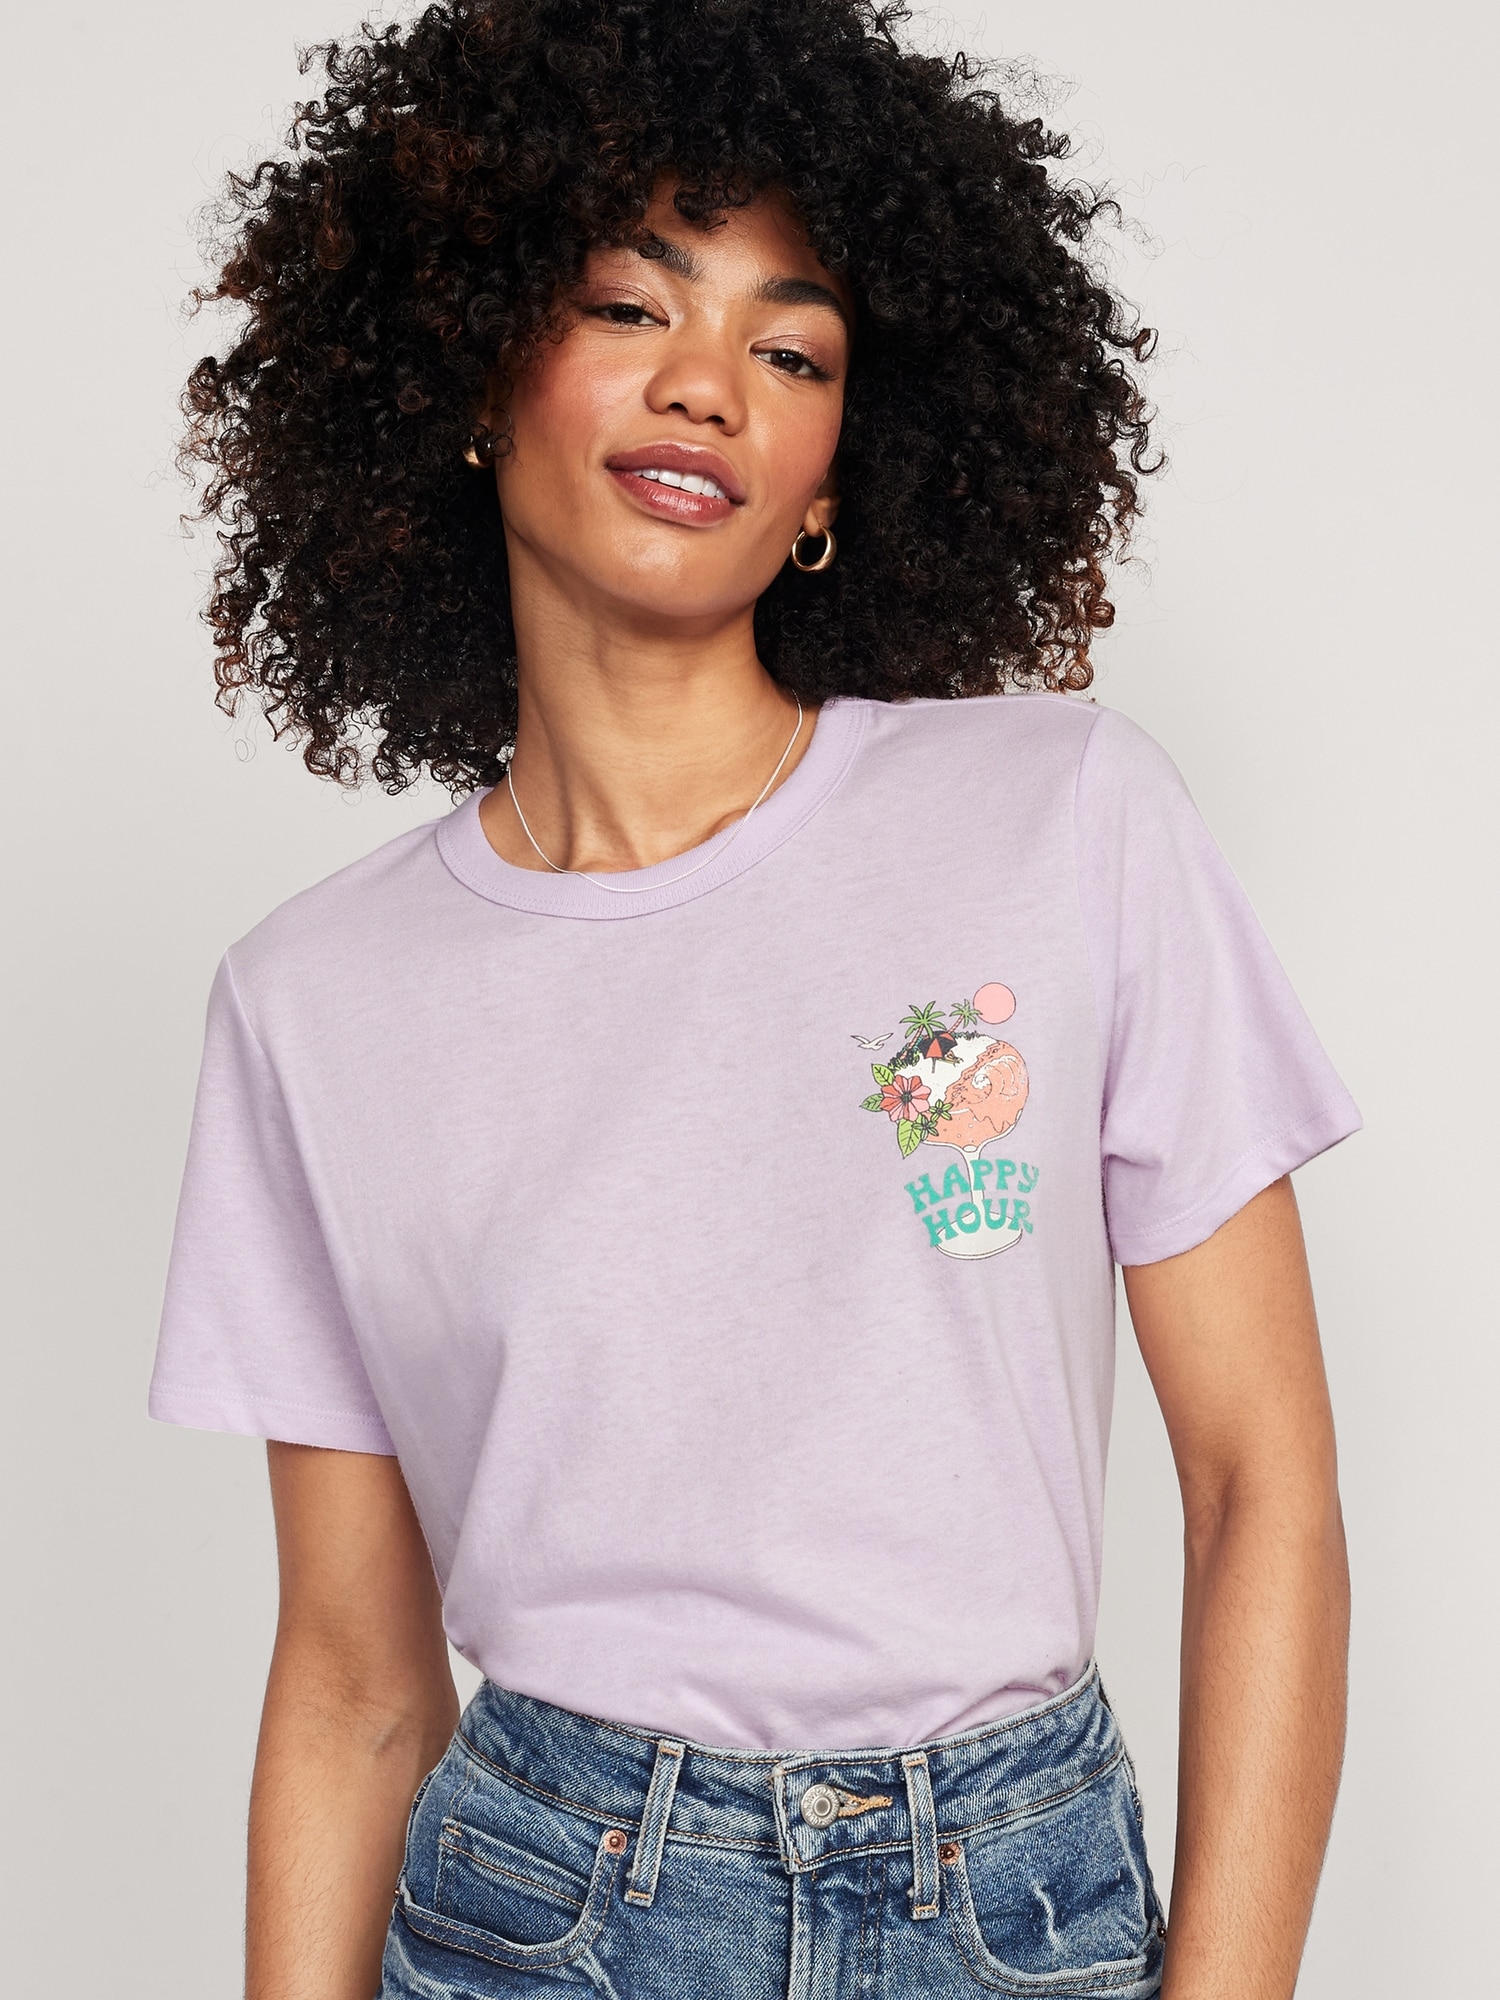 EveryWear Graphic T-Shirt | Old Navy